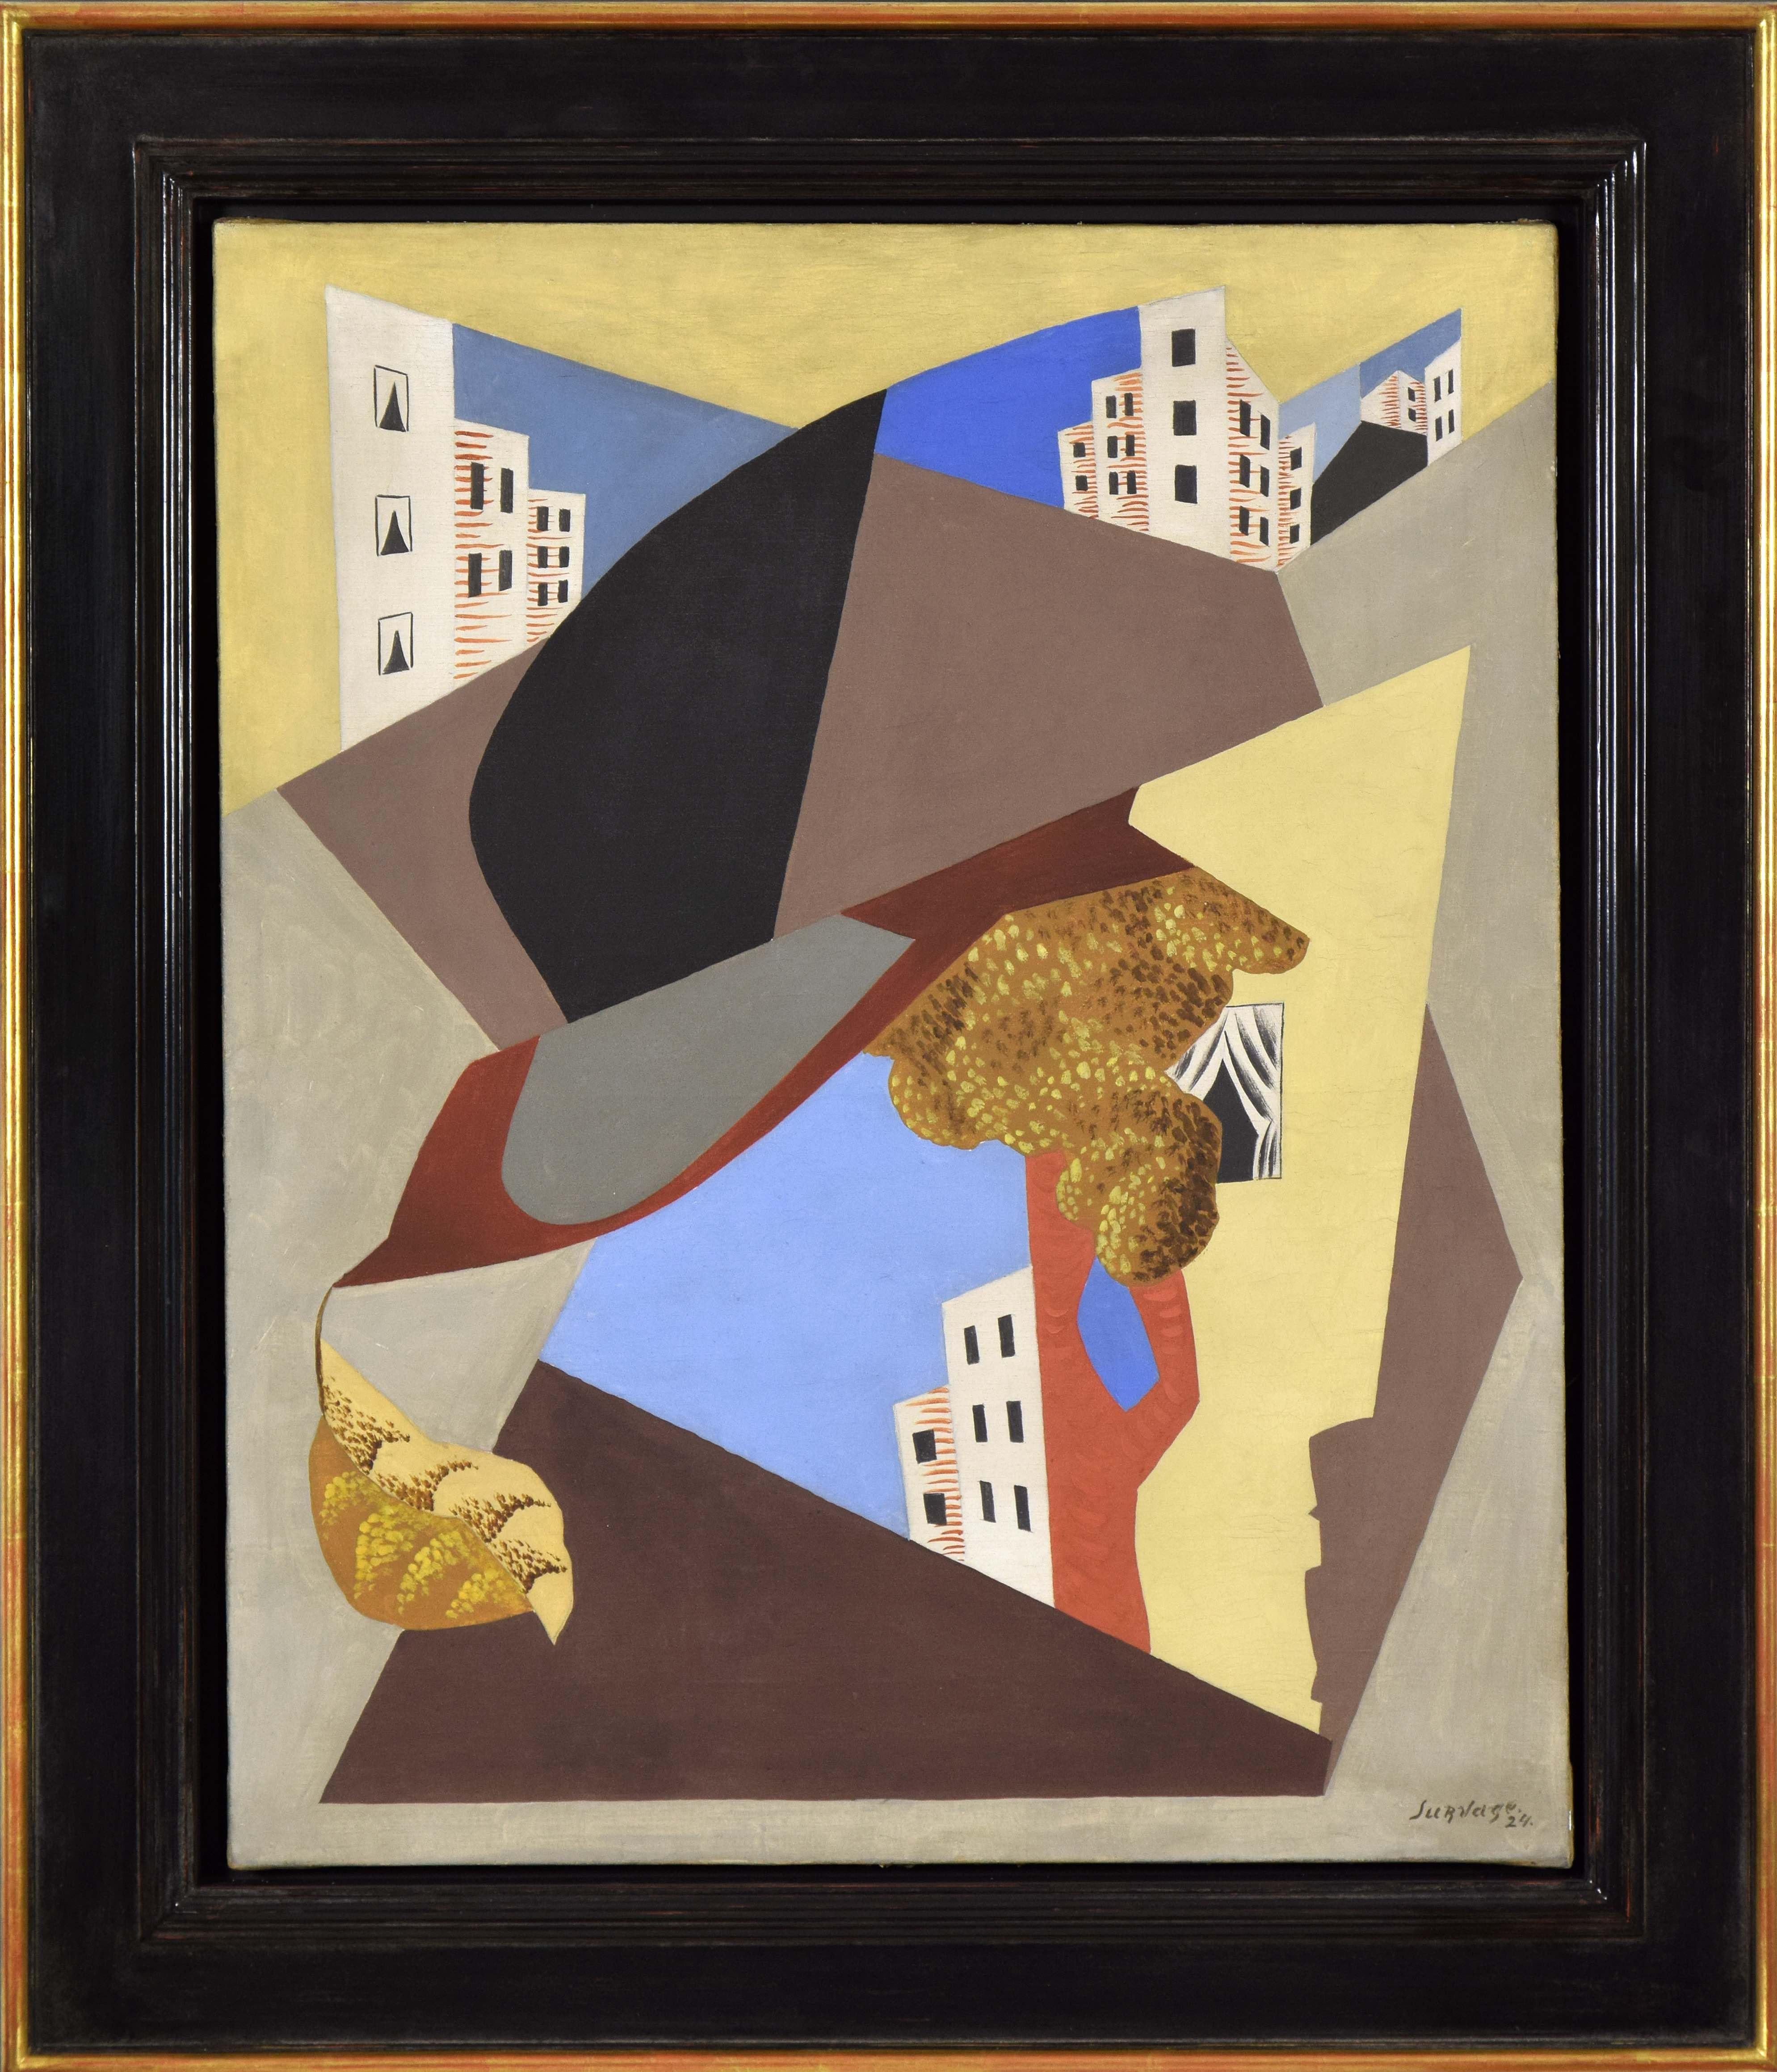 Ville by LÉOPOLD SURVAGE - art, colourful cubist oil painting by Modern master - Painting by Léopold Survage